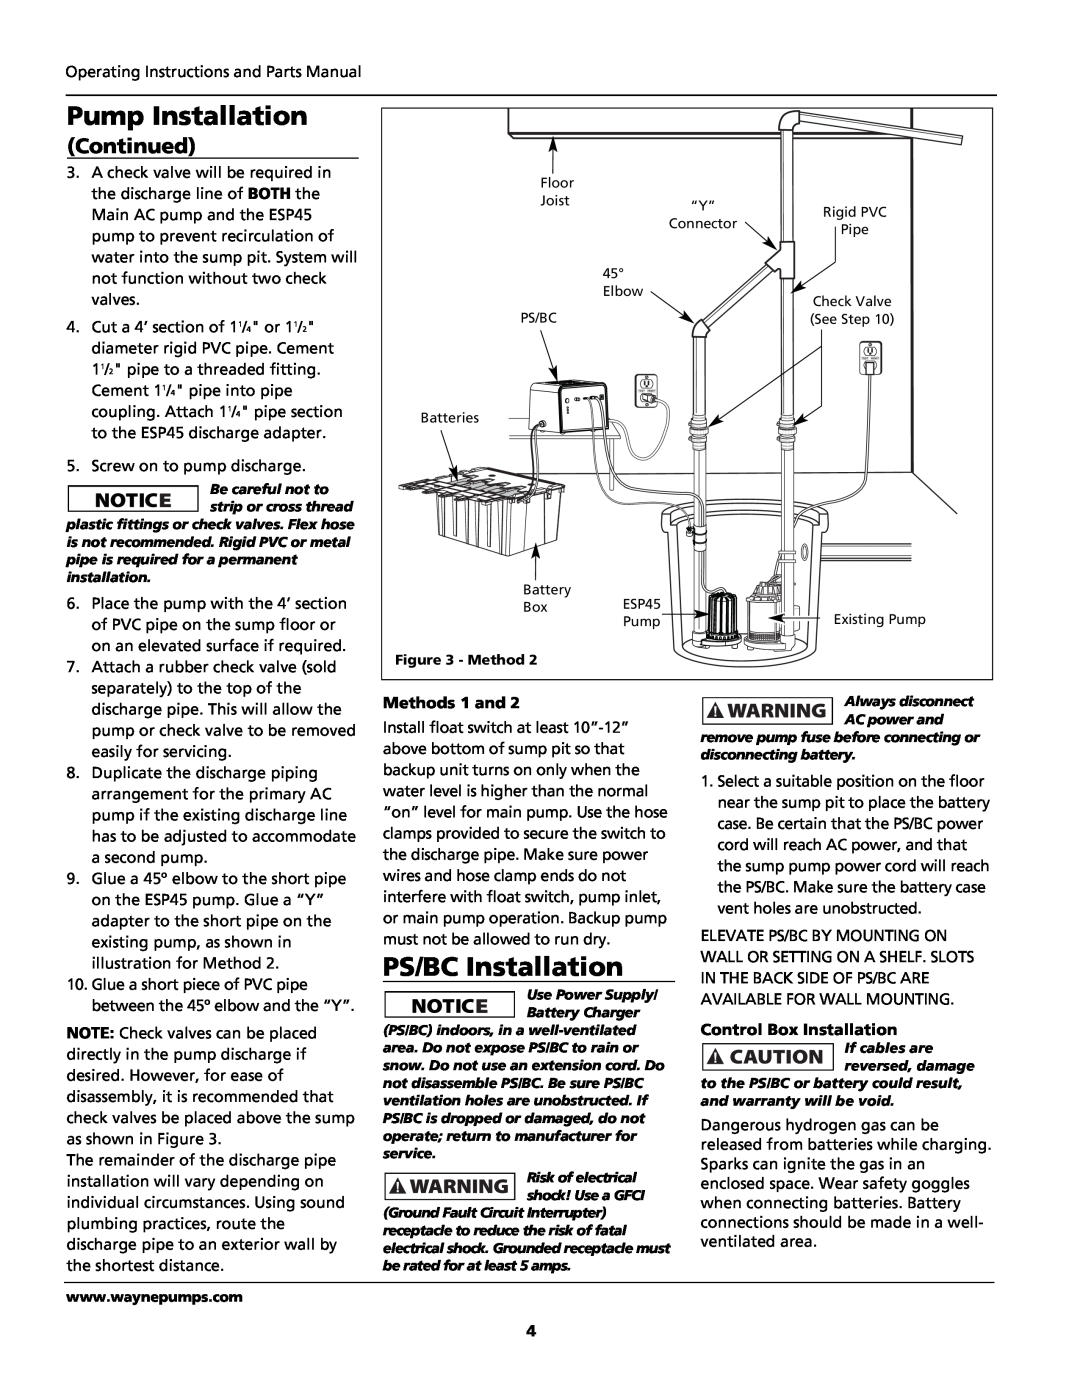 Wayne 353601-001 specifications PS/BC Installation, Continued, Methods 1 and, Control Box Installation, Pump Installation 